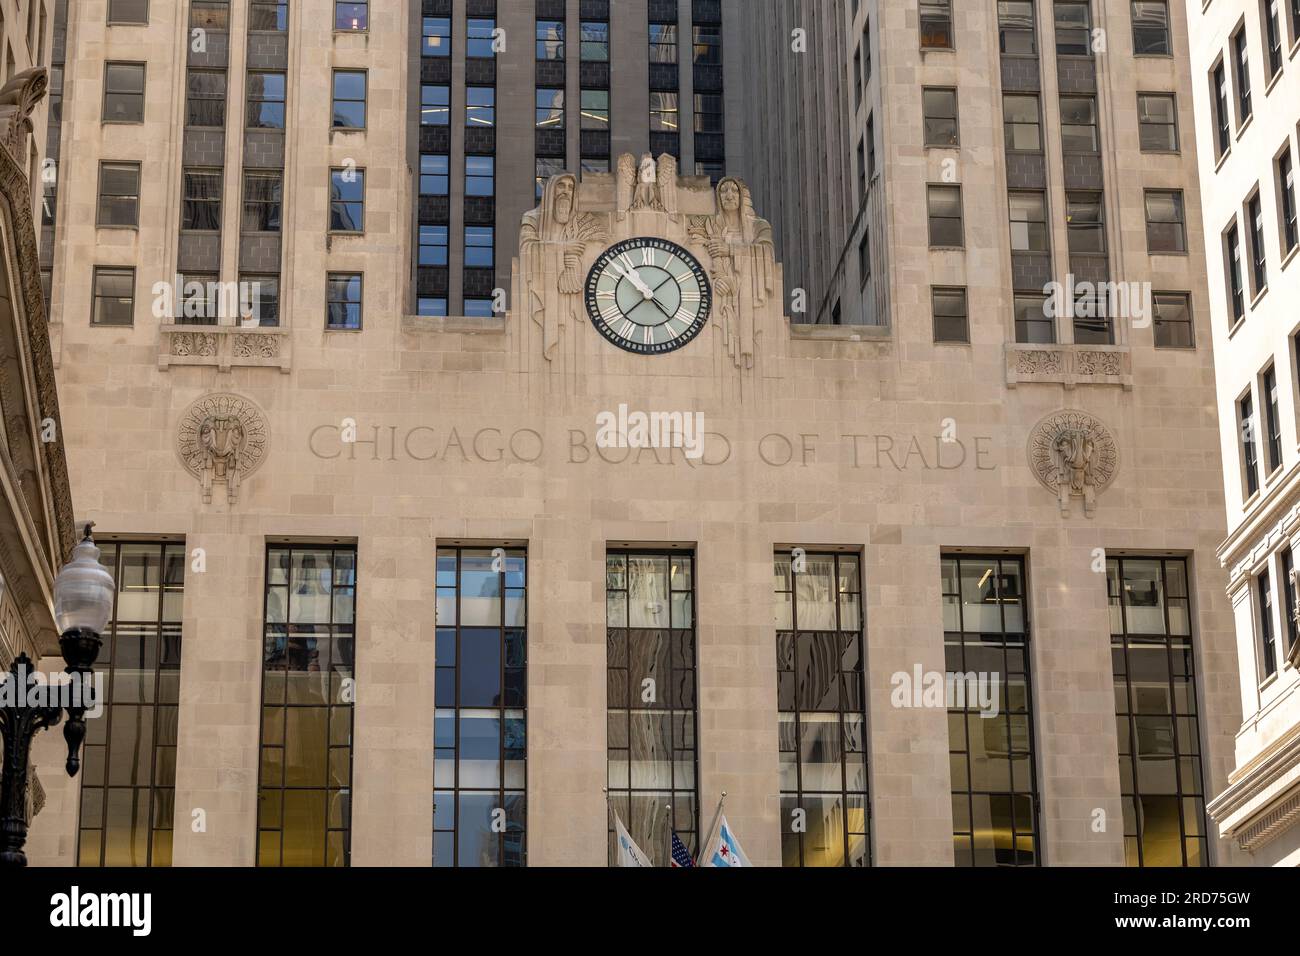 The Chicago Board Of Trade Building Facade In The Financial District Of Chicago USA On W Jackson Blvd, Chicago Illinois America Stock Photo